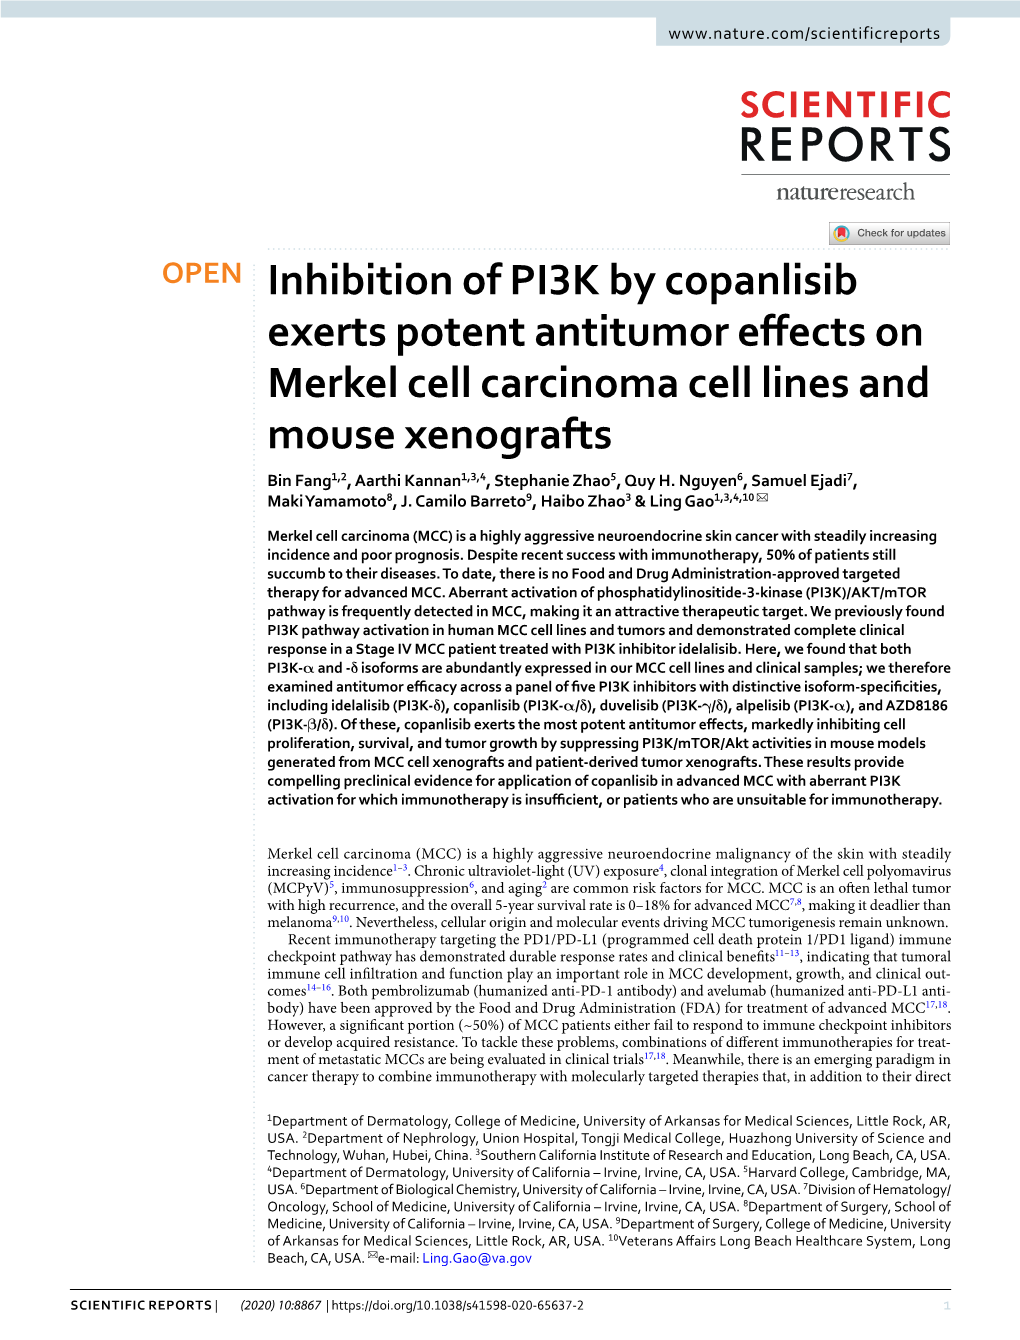 Inhibition of PI3K by Copanlisib Exerts Potent Antitumor Effects on Merkel